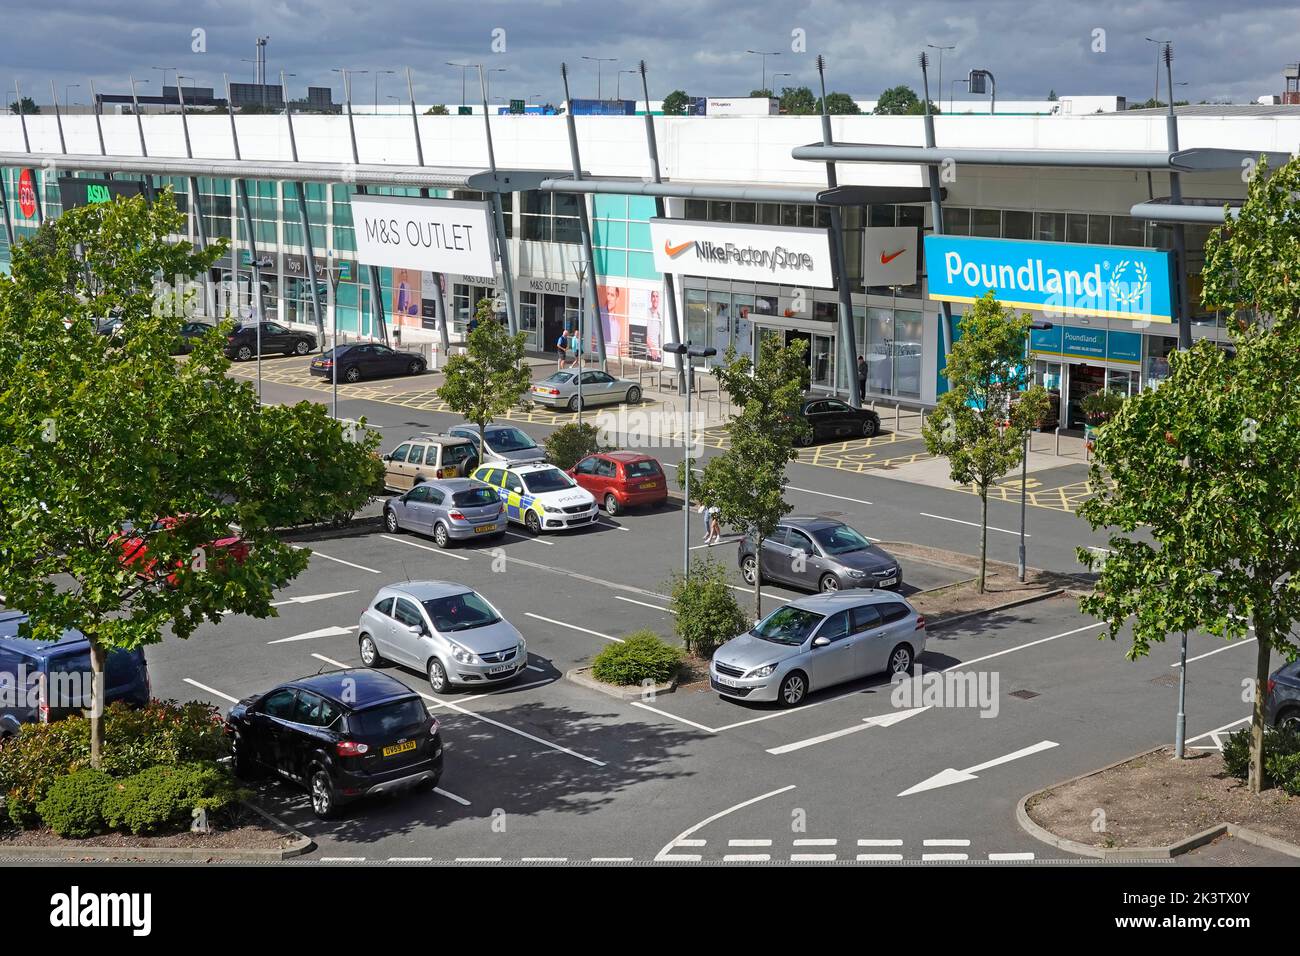 Aerial view retail business shop units for M&S Outlet Nick Factory Store & Poundland in Thurrock Shopping Park free customer car park Essex England UK Stock Photo